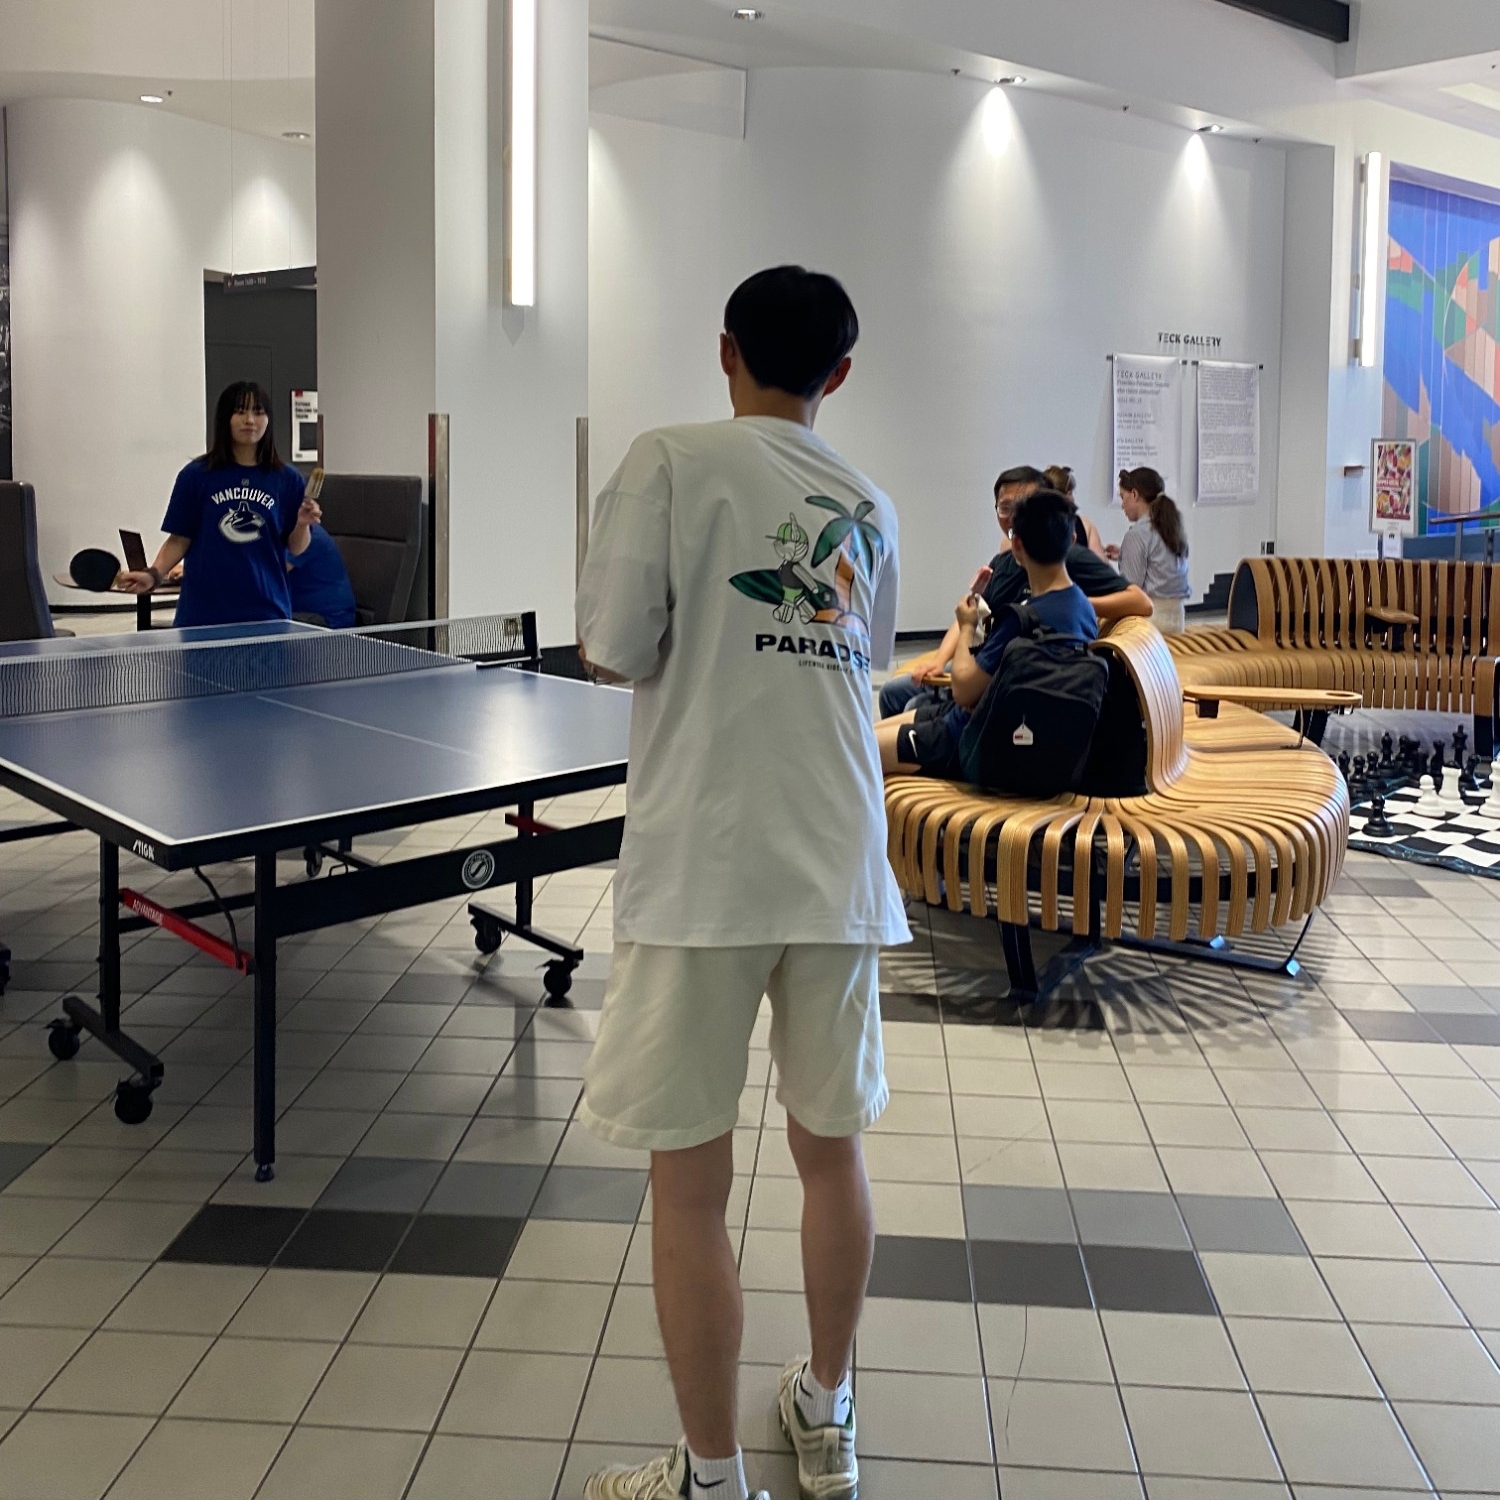 People enjoying popsicles and playing ping pong in the Games Lounge, with people sitting on benches nearby, at the 2023 Summer Social